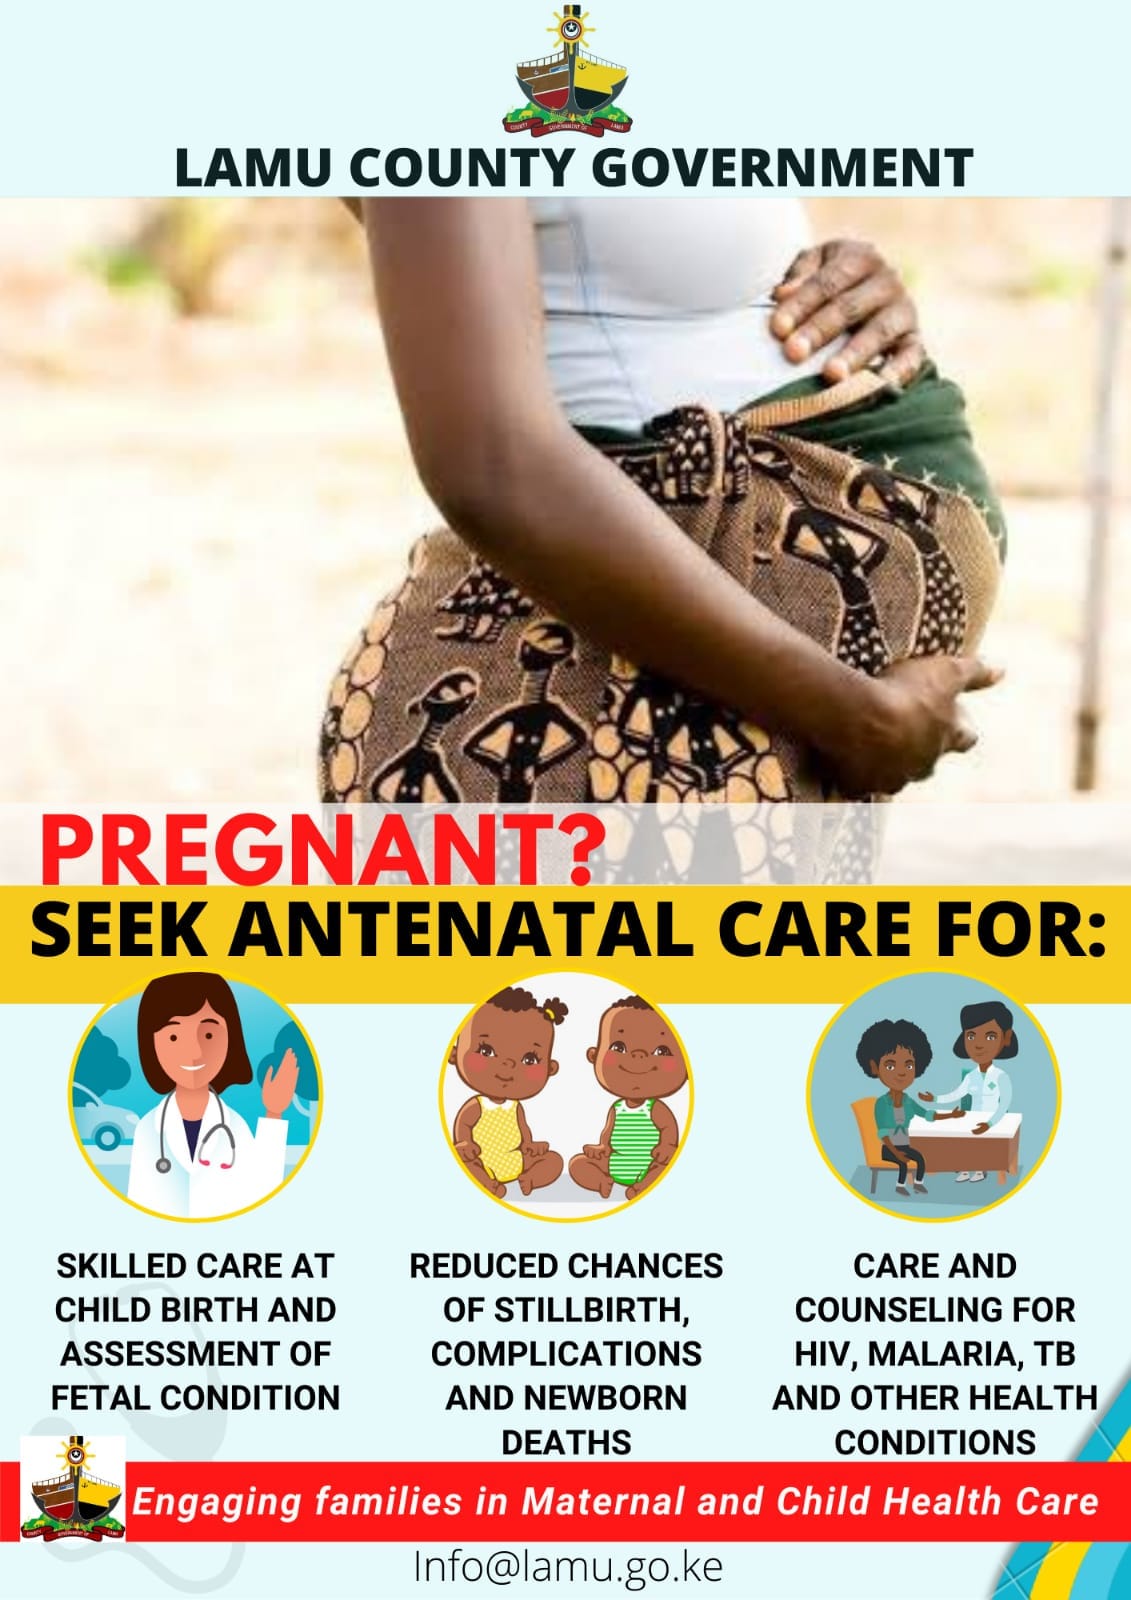 COUNTY STARTS PANDEMIC-RELATED MATERNAL AND CHILD HEALTH CARE CAMPAIGN